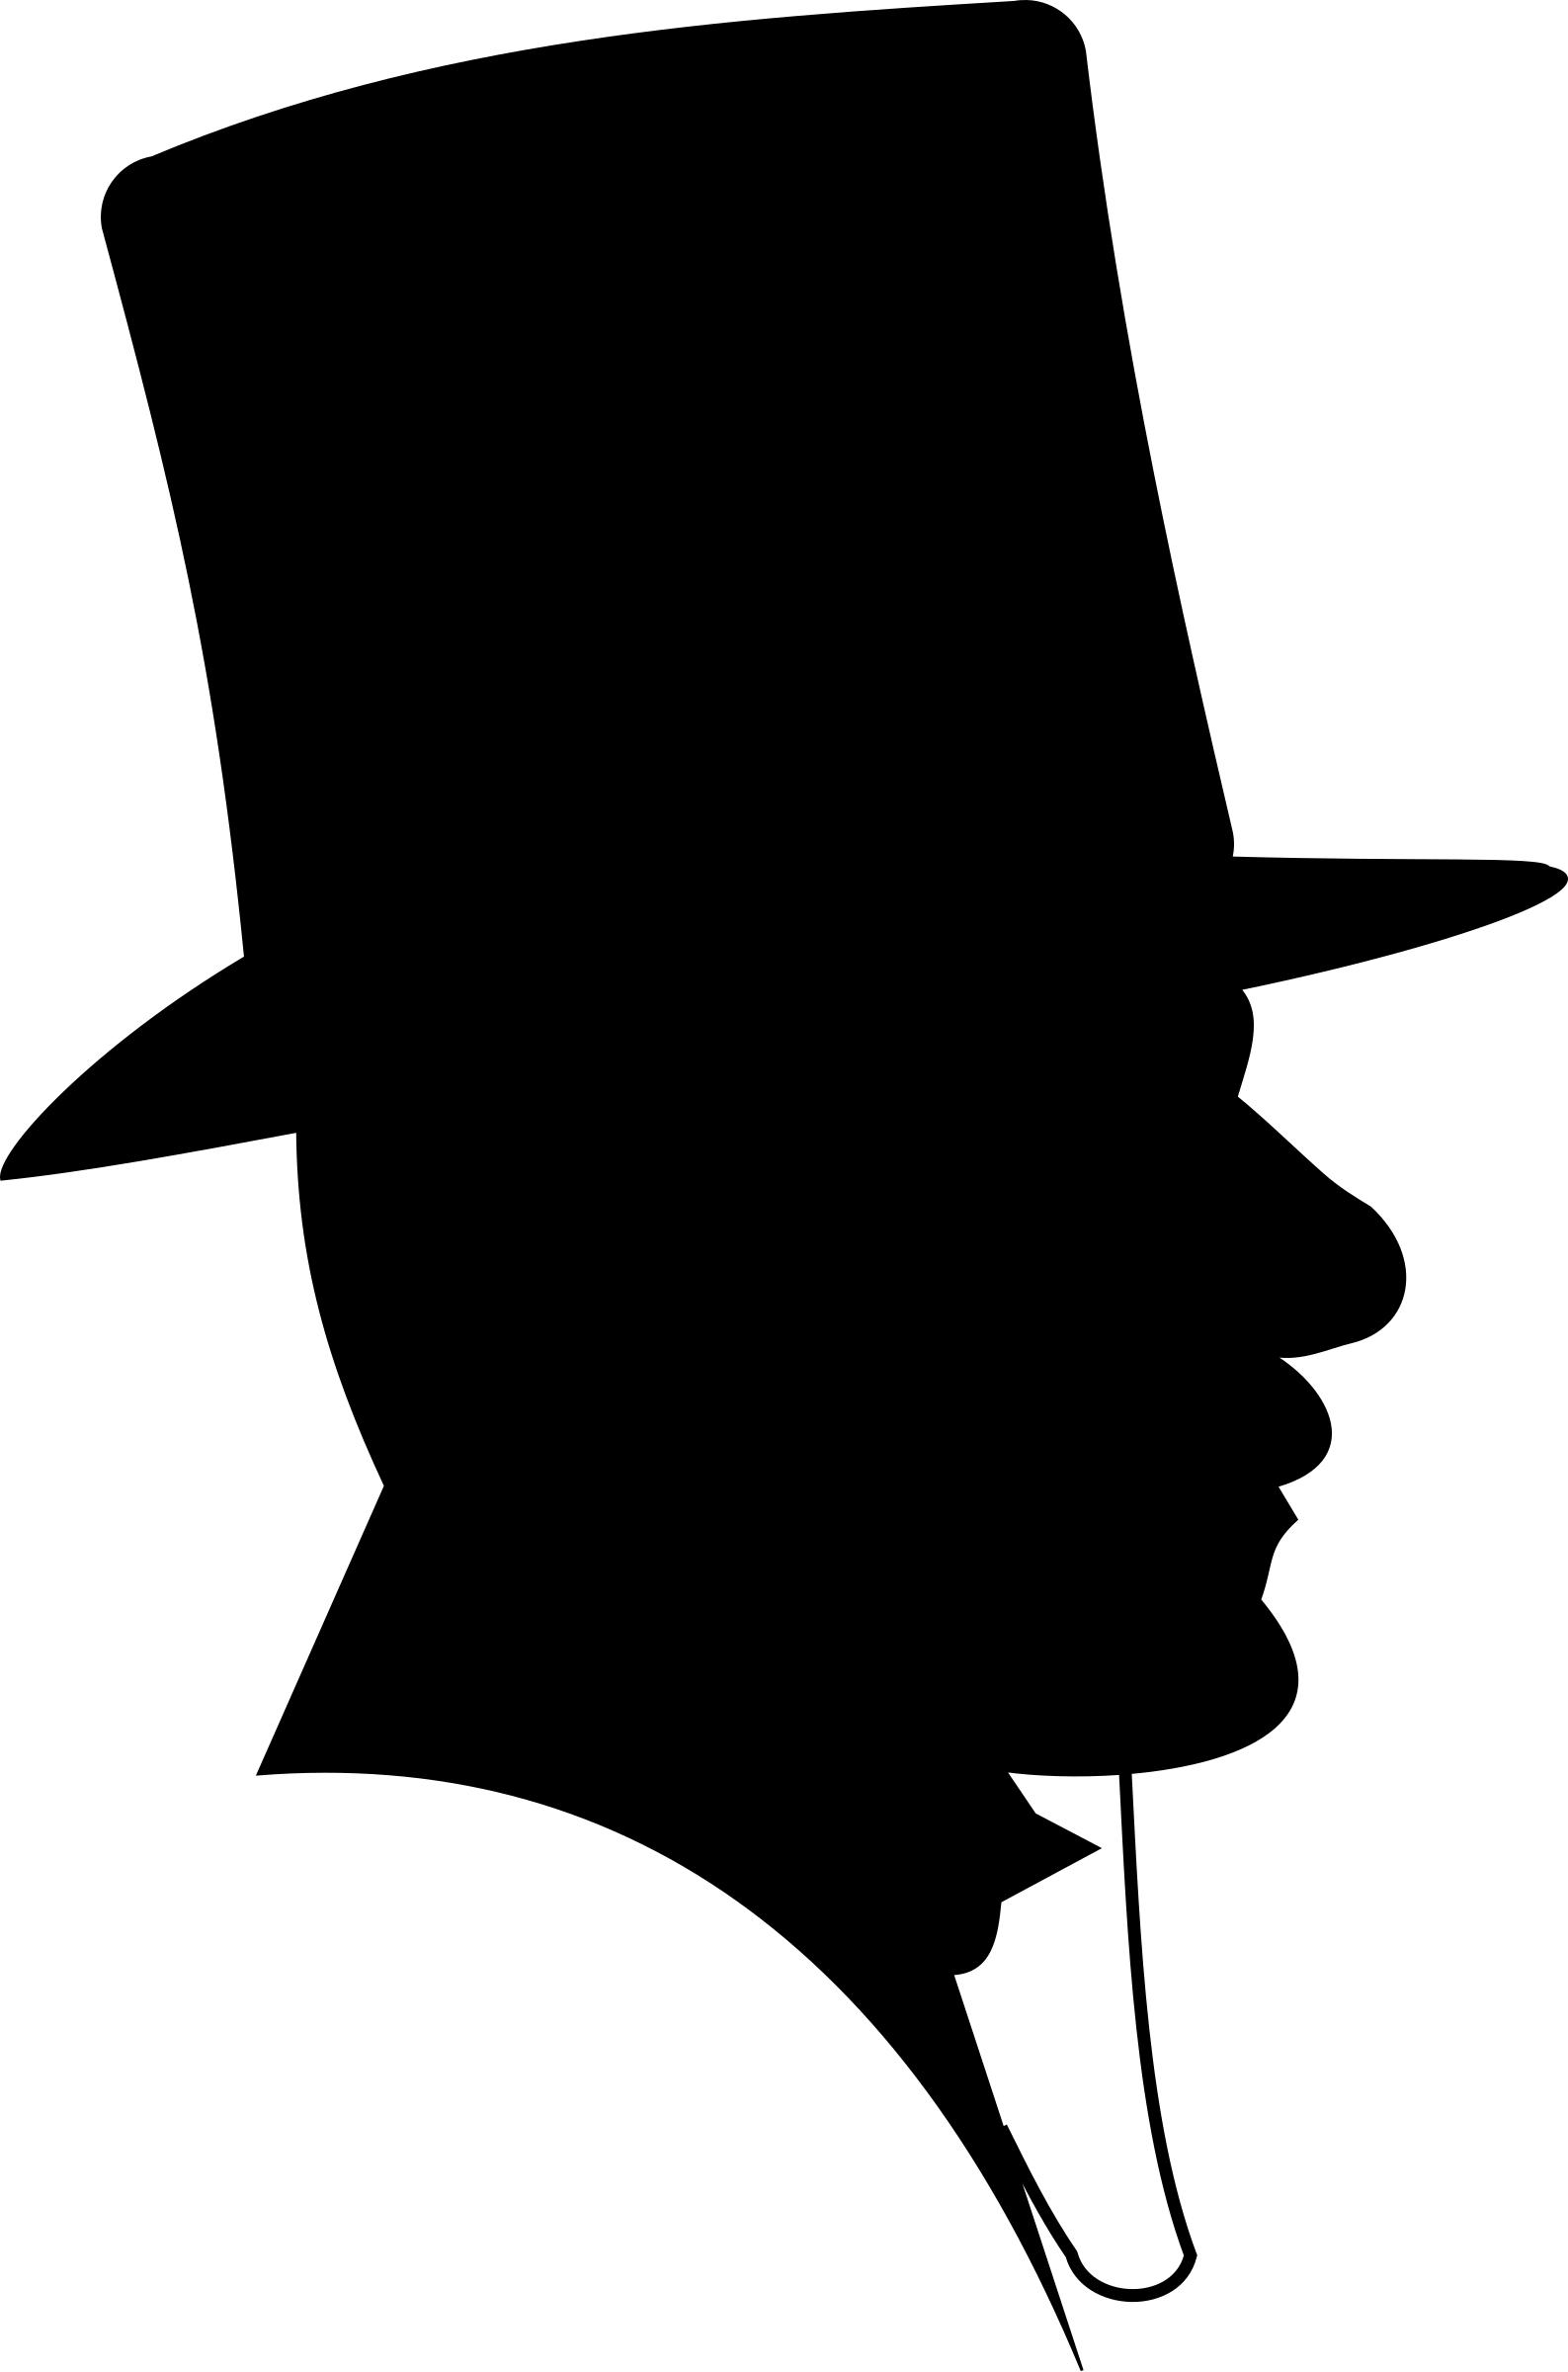 Victorian Man in Top Hat Silhoette Profile png